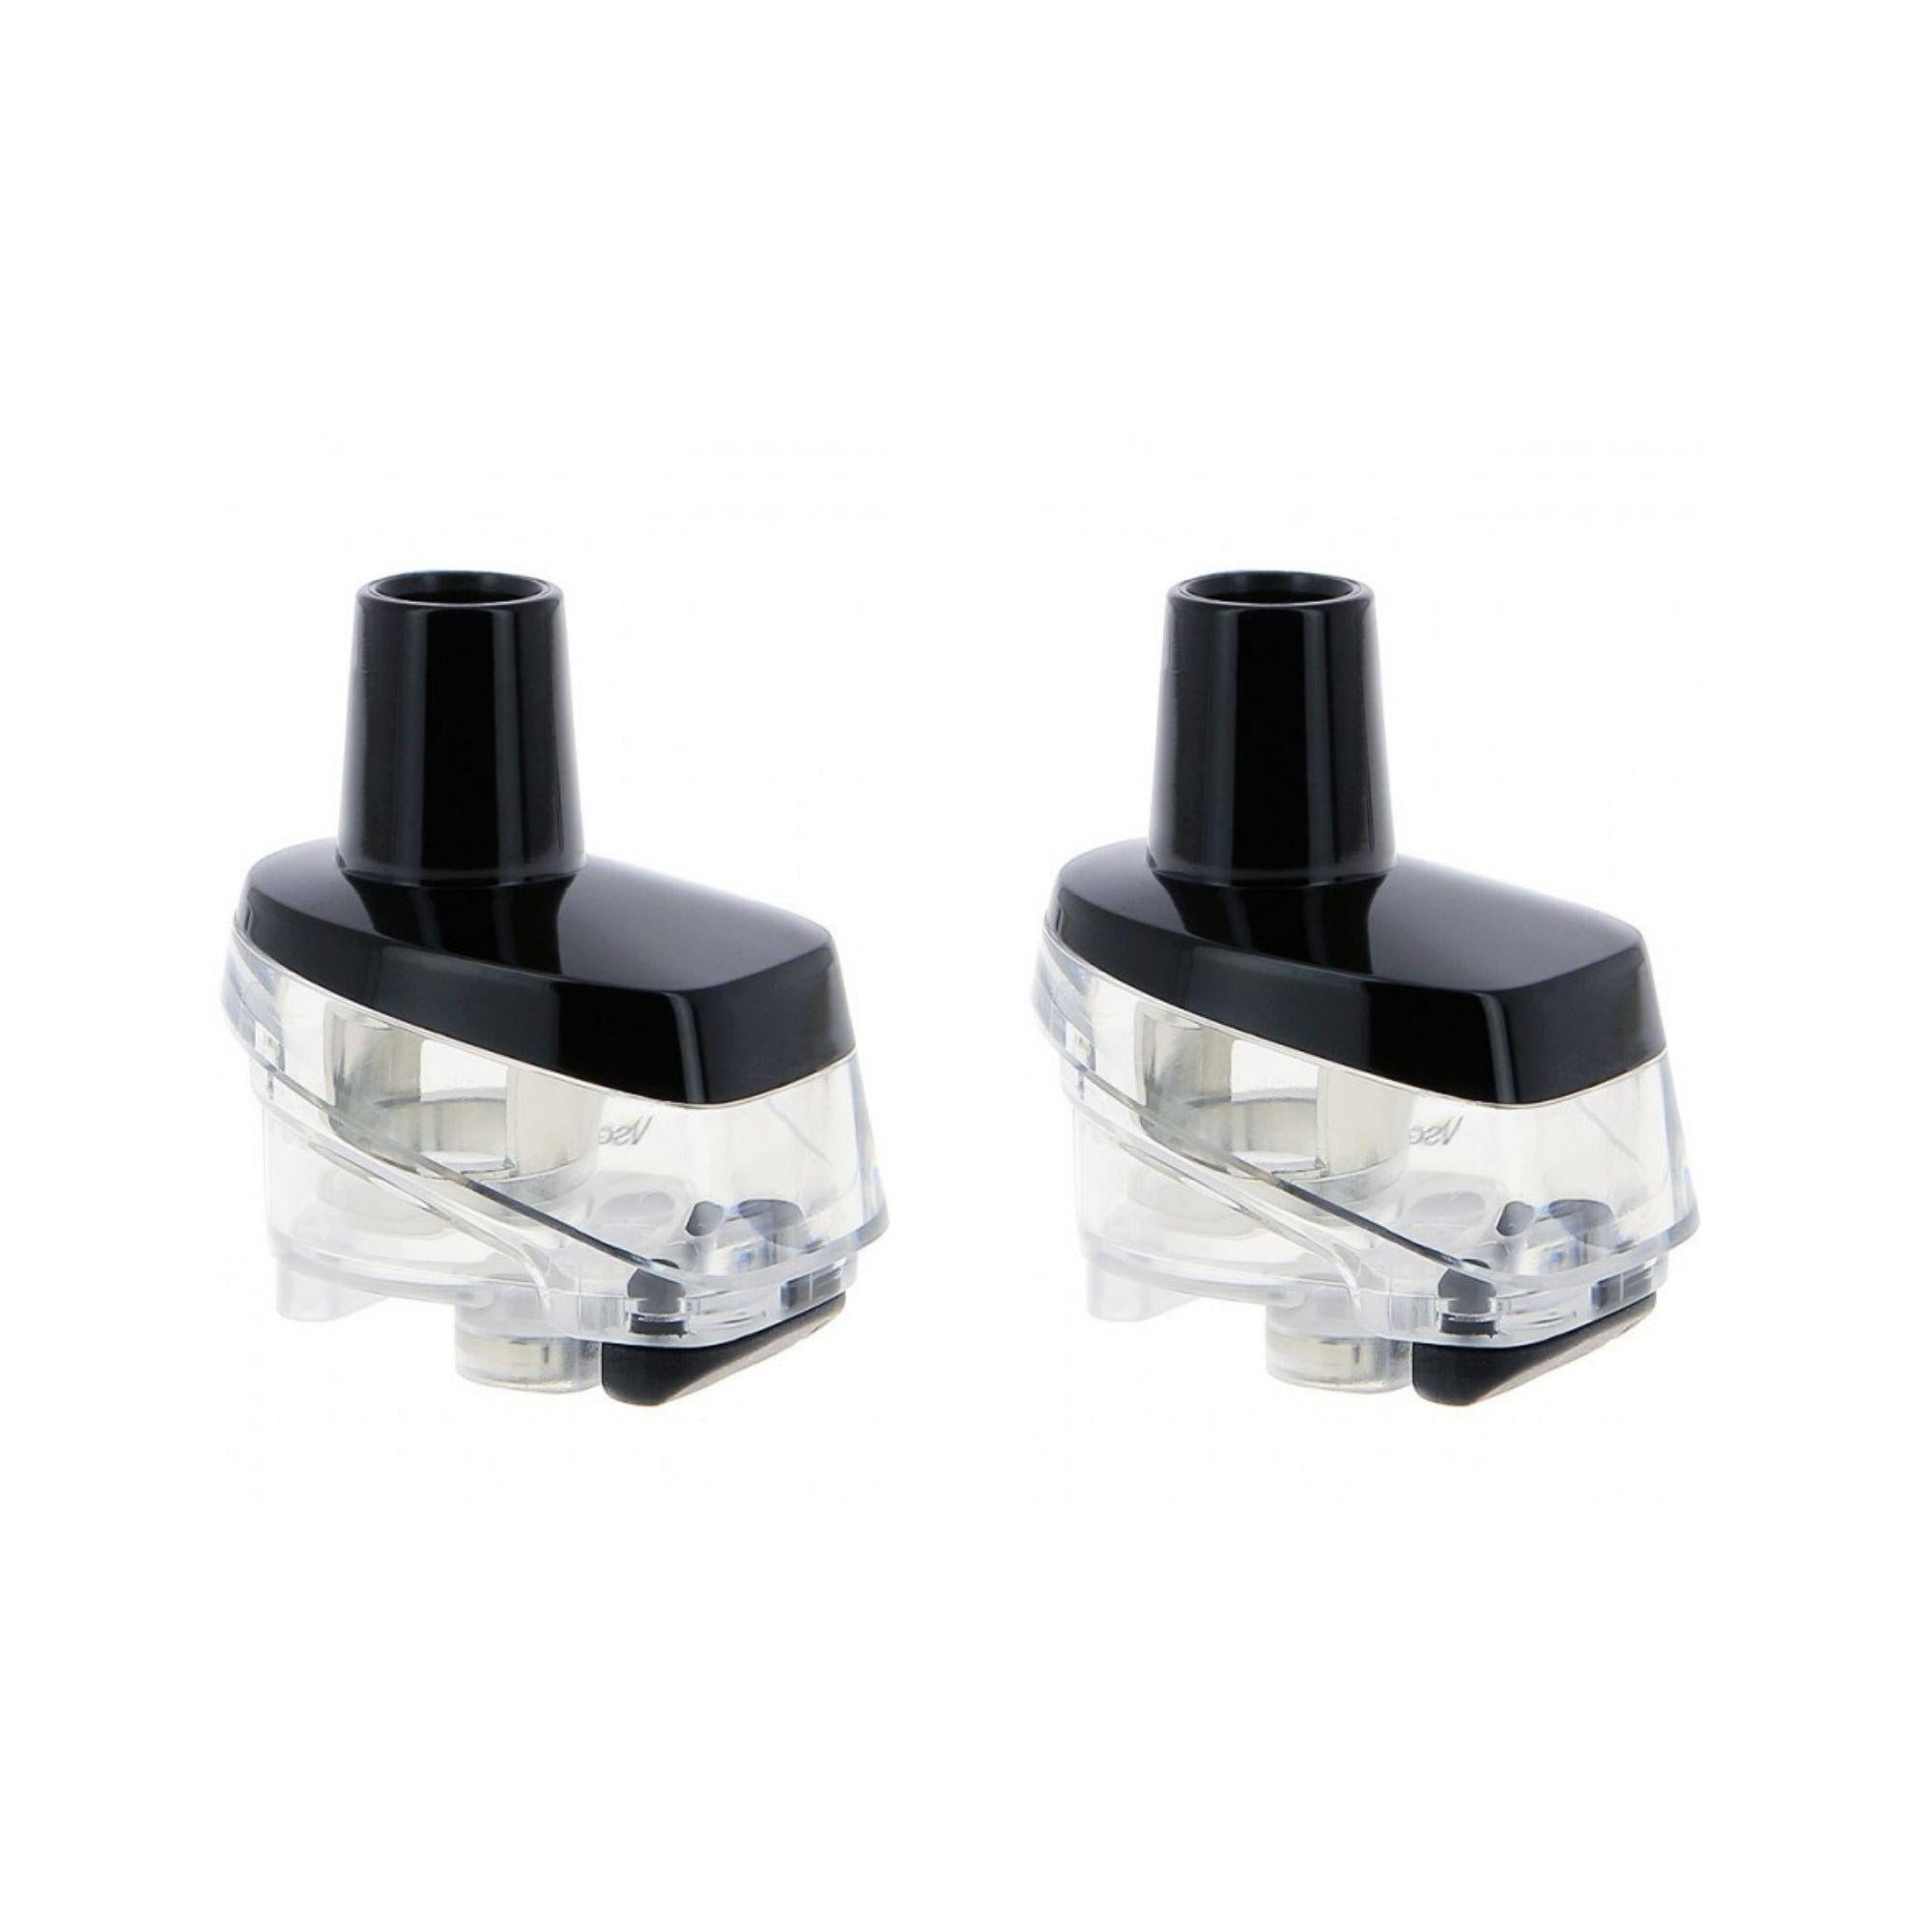 Vaporesso Target PM80 Replacement Pods 2 Pack